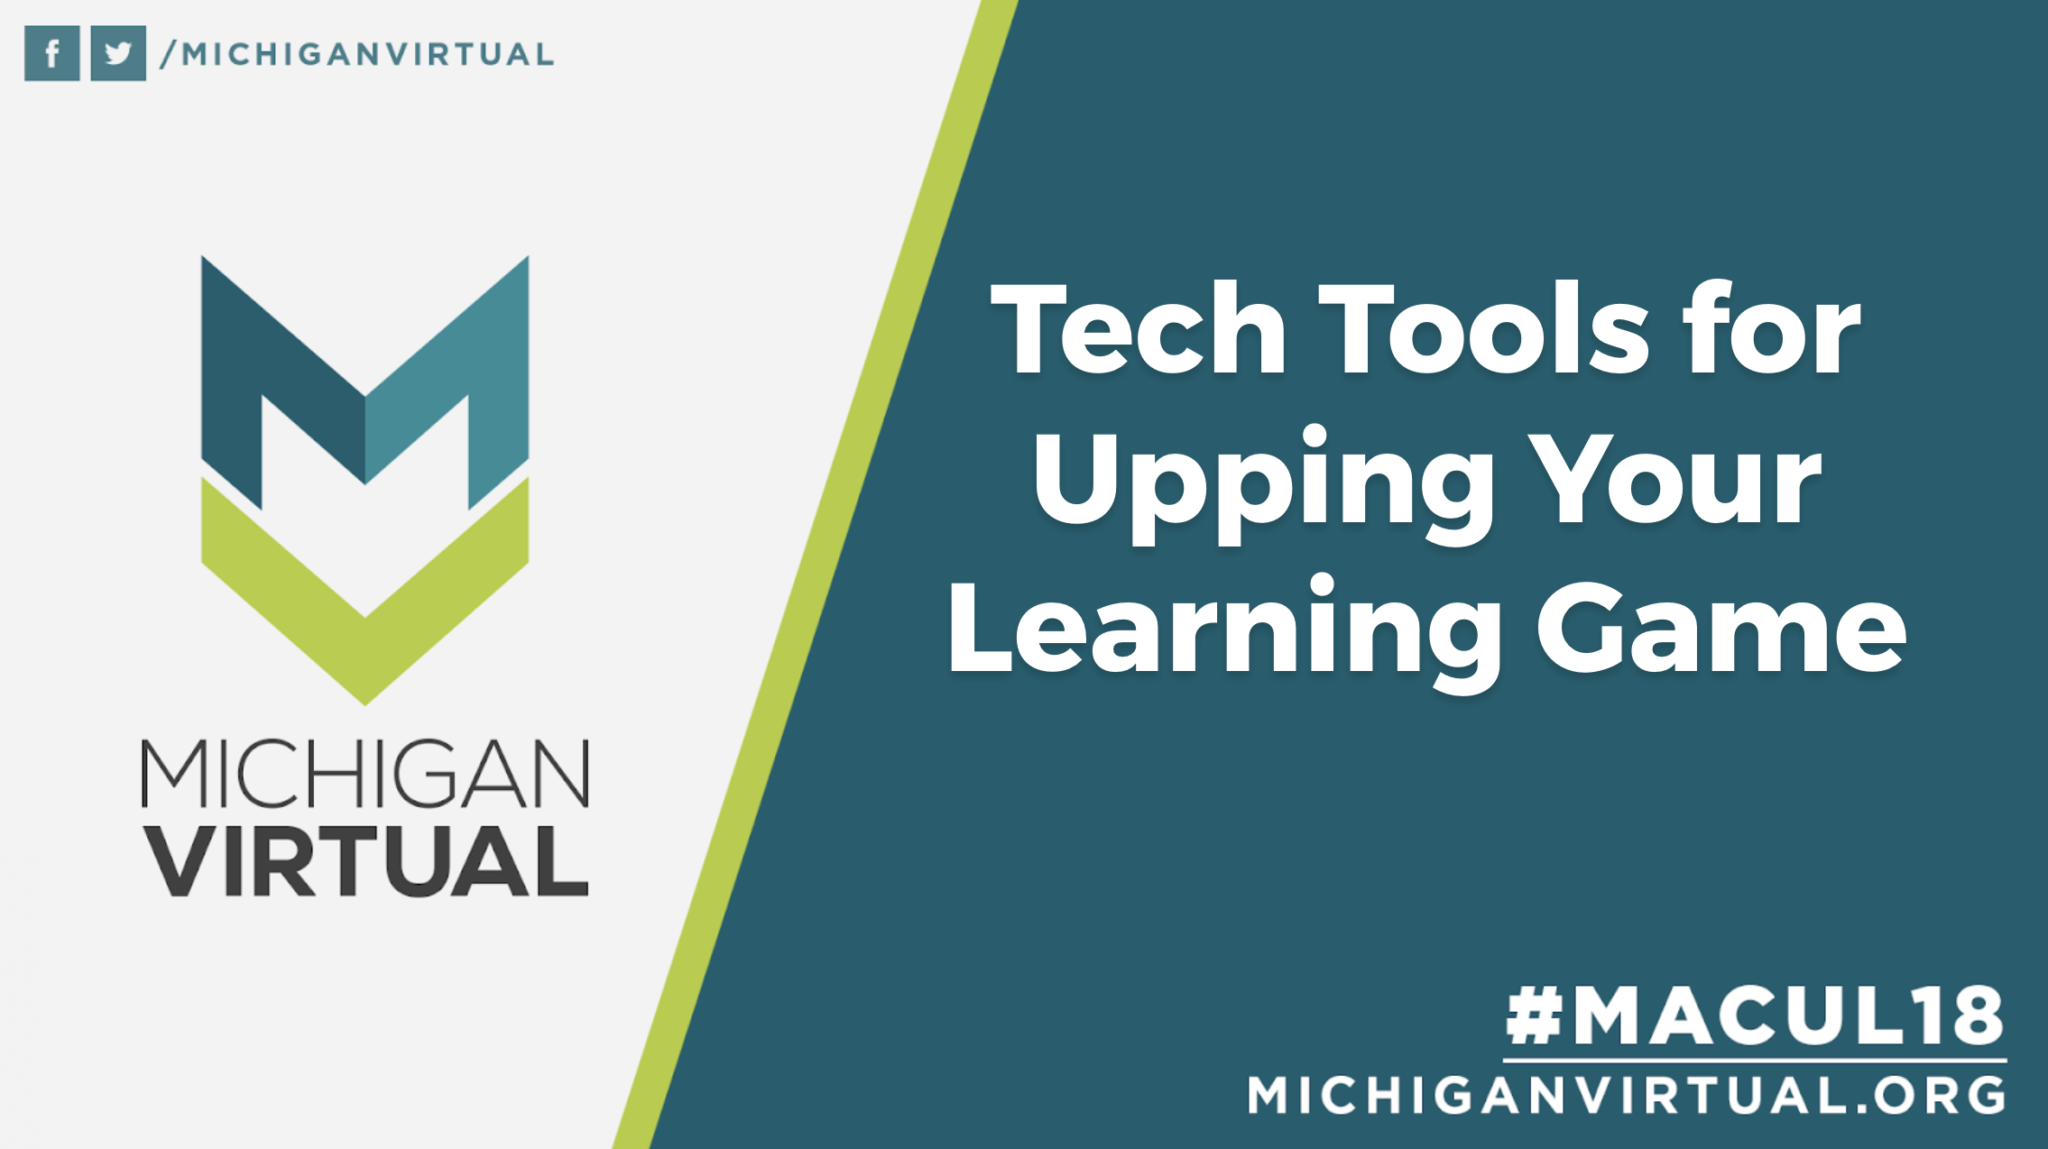 Tech Tools for Upping Your Learning Game Slides